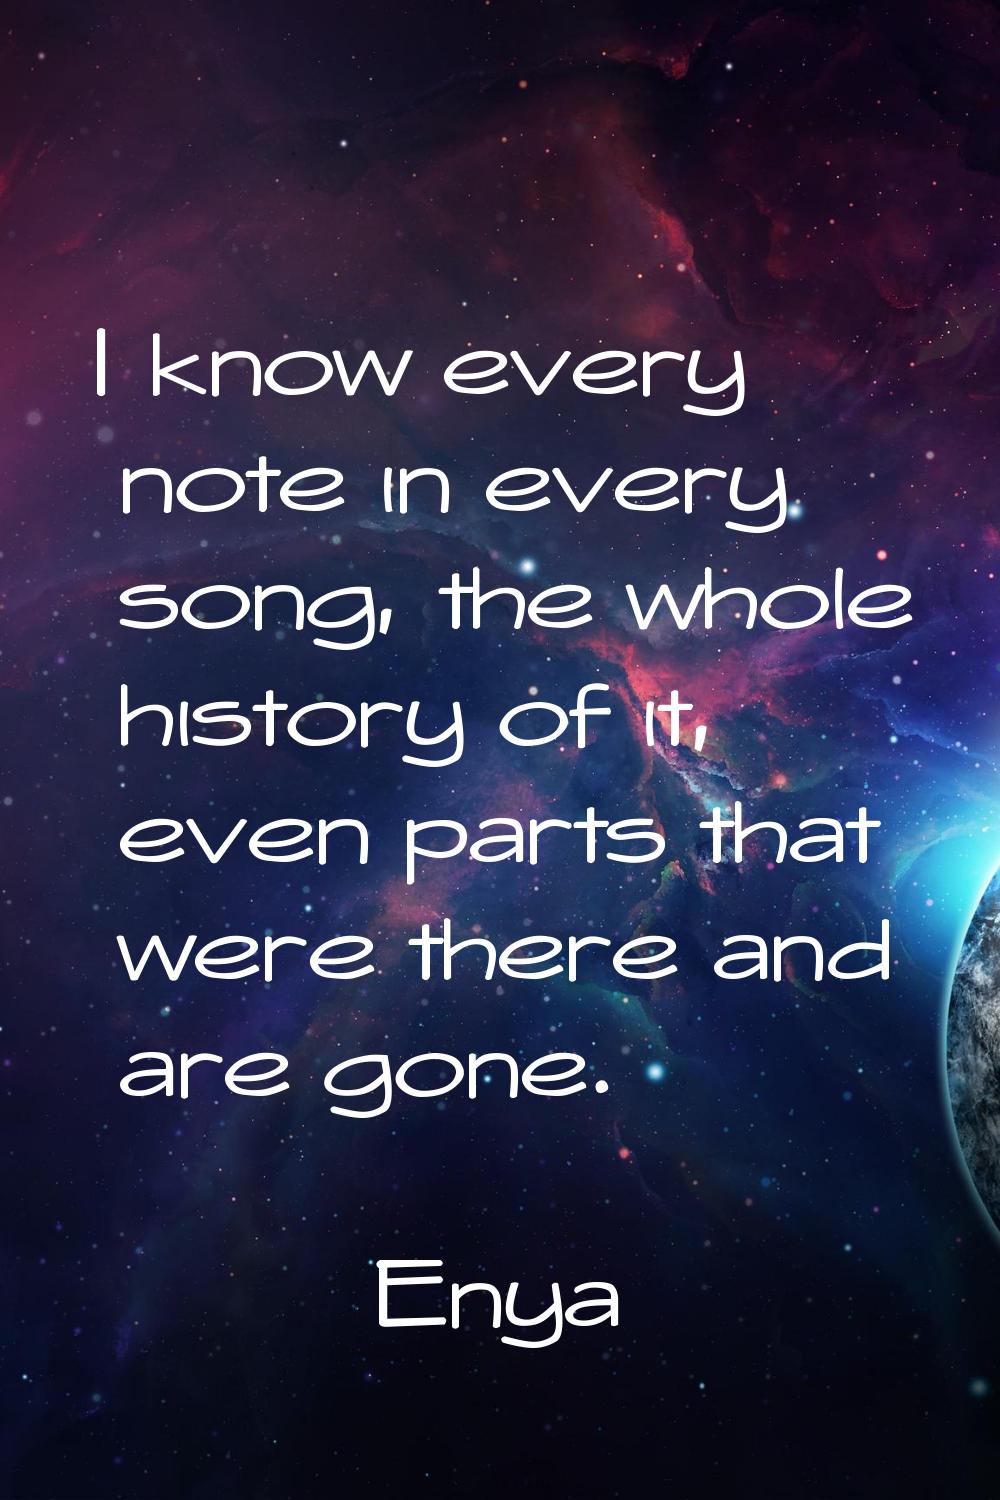 I know every note in every song, the whole history of it, even parts that were there and are gone.